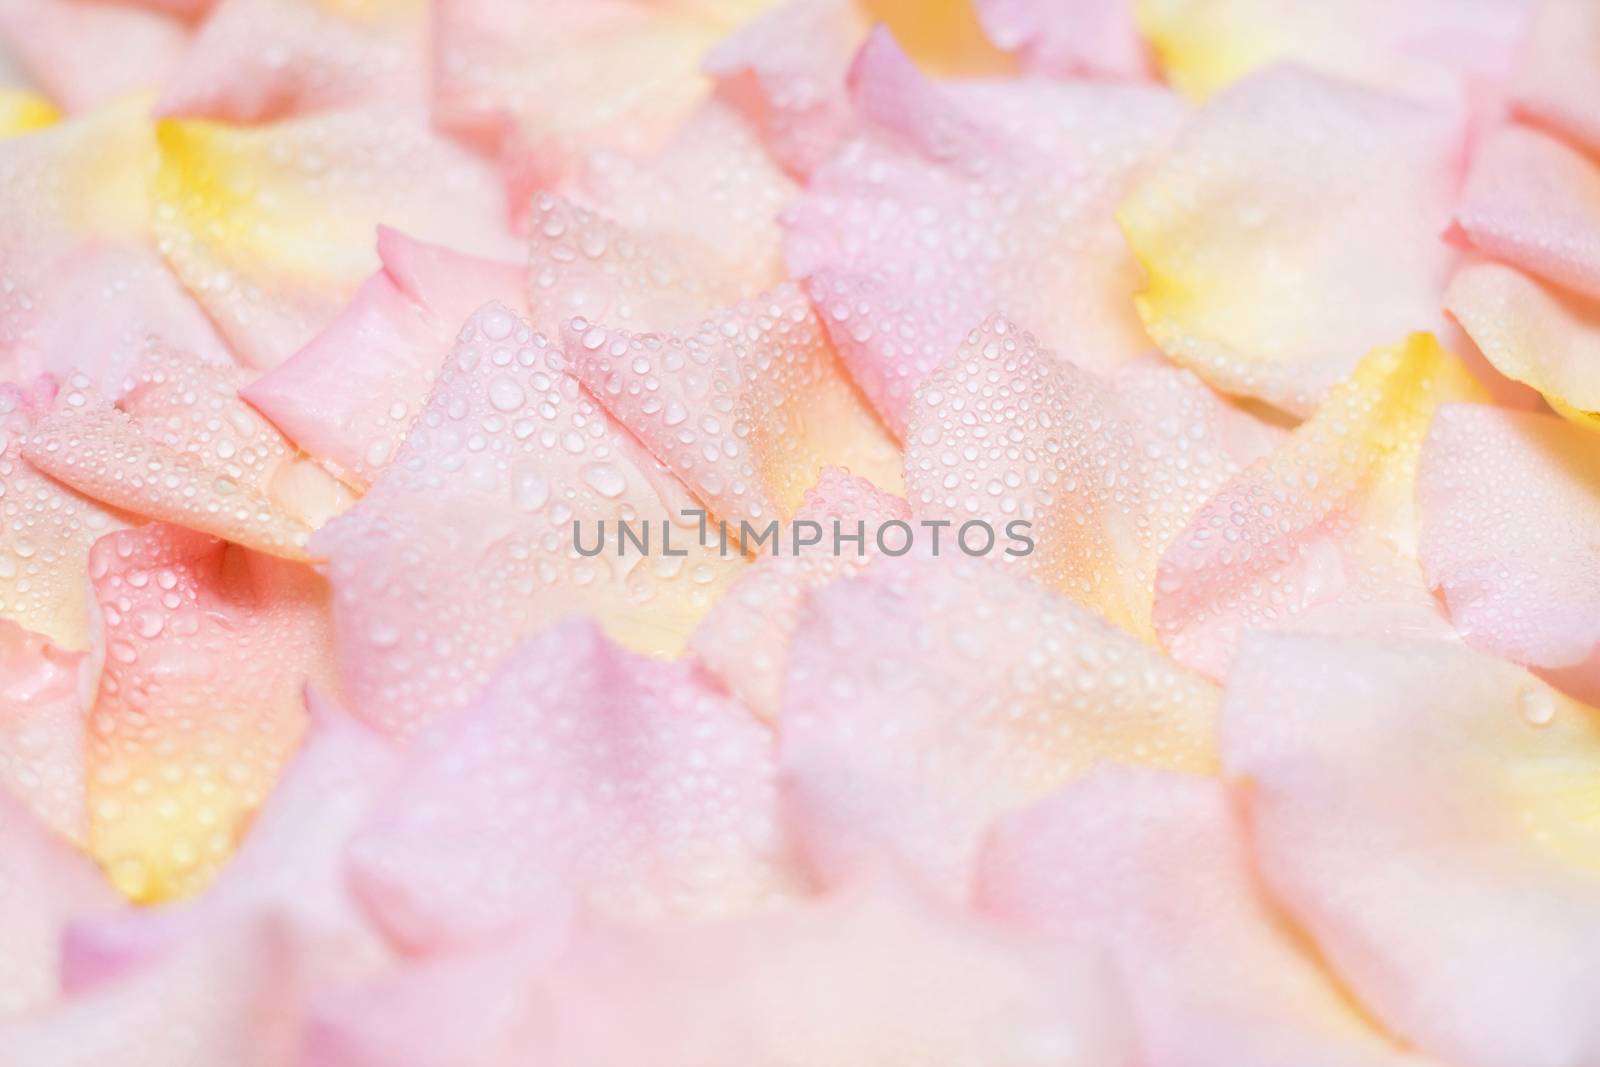 Rose petals with water droplets background by myyaym